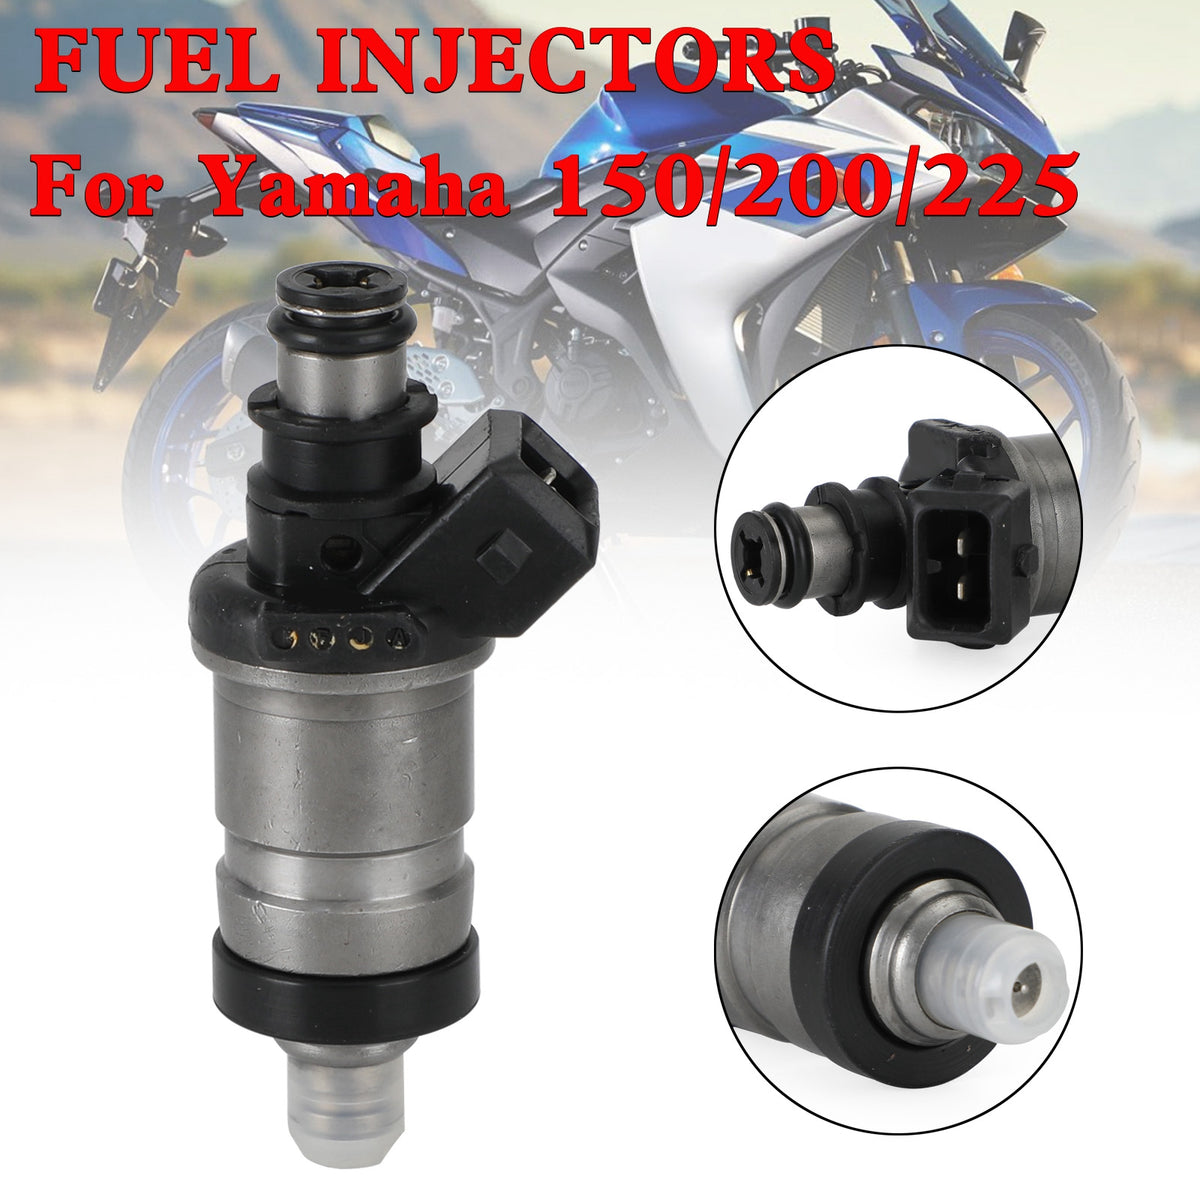 Fuel Injector 65L-13761-00-00 For Yamaha 150/200/225 HP 2 Stroke Generic